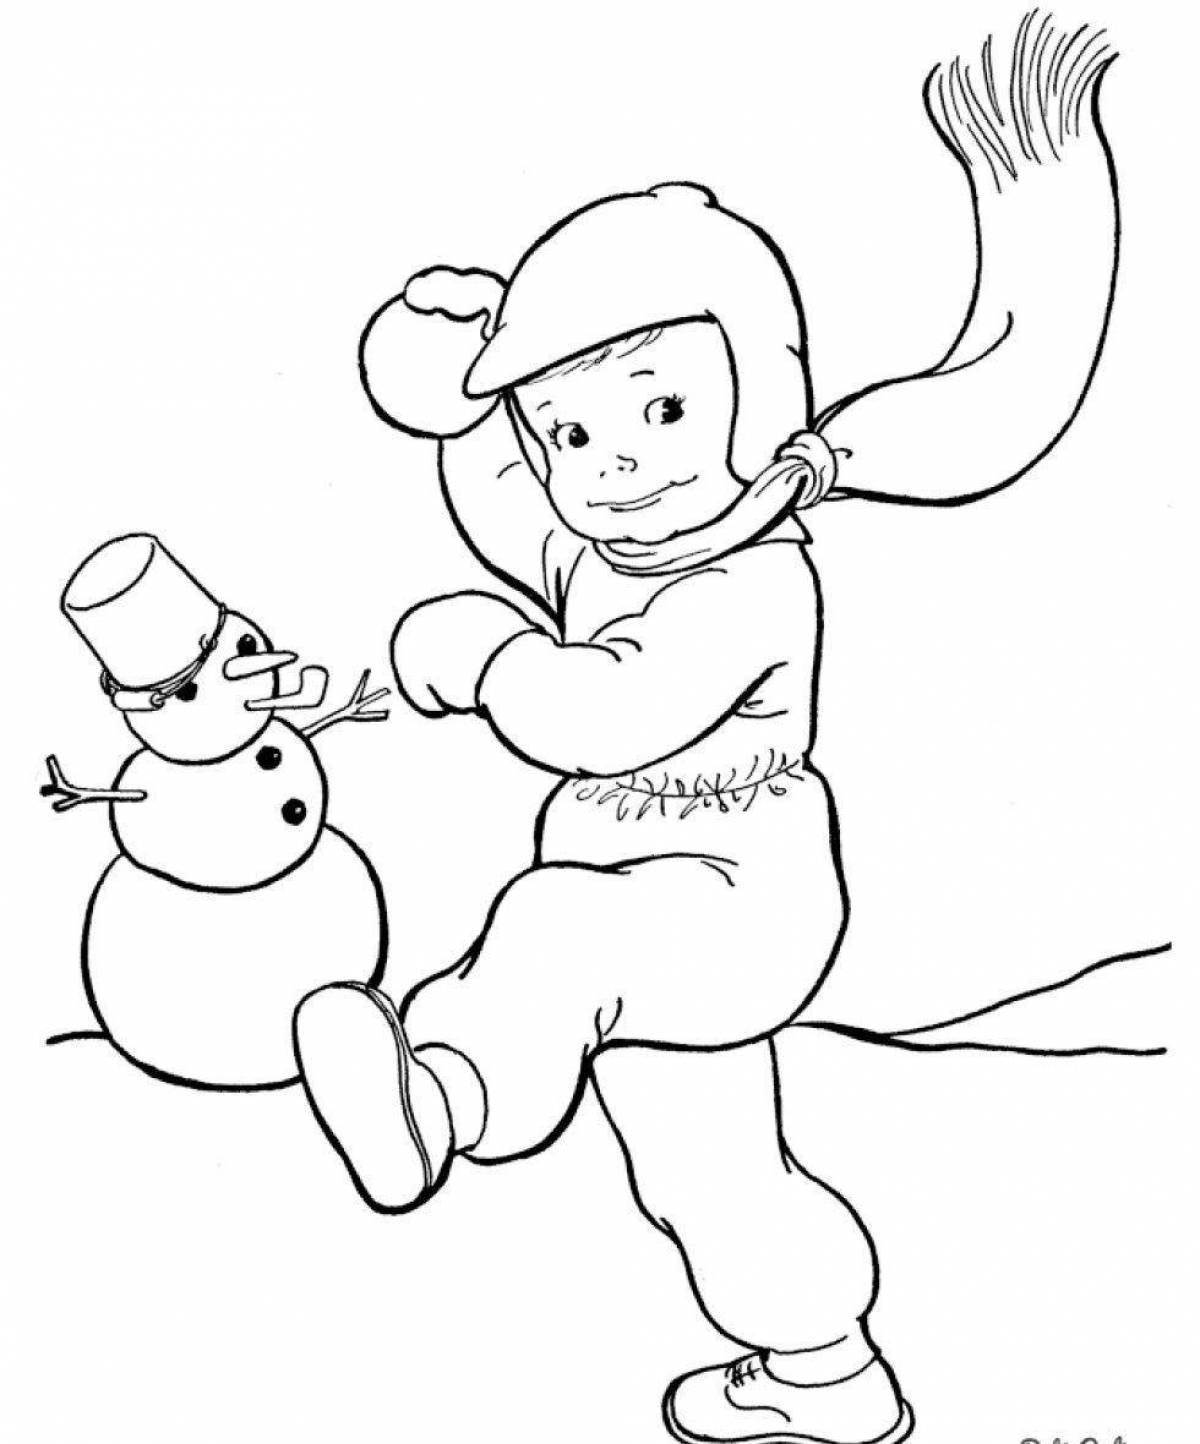 Colorful snowball coloring page for kids